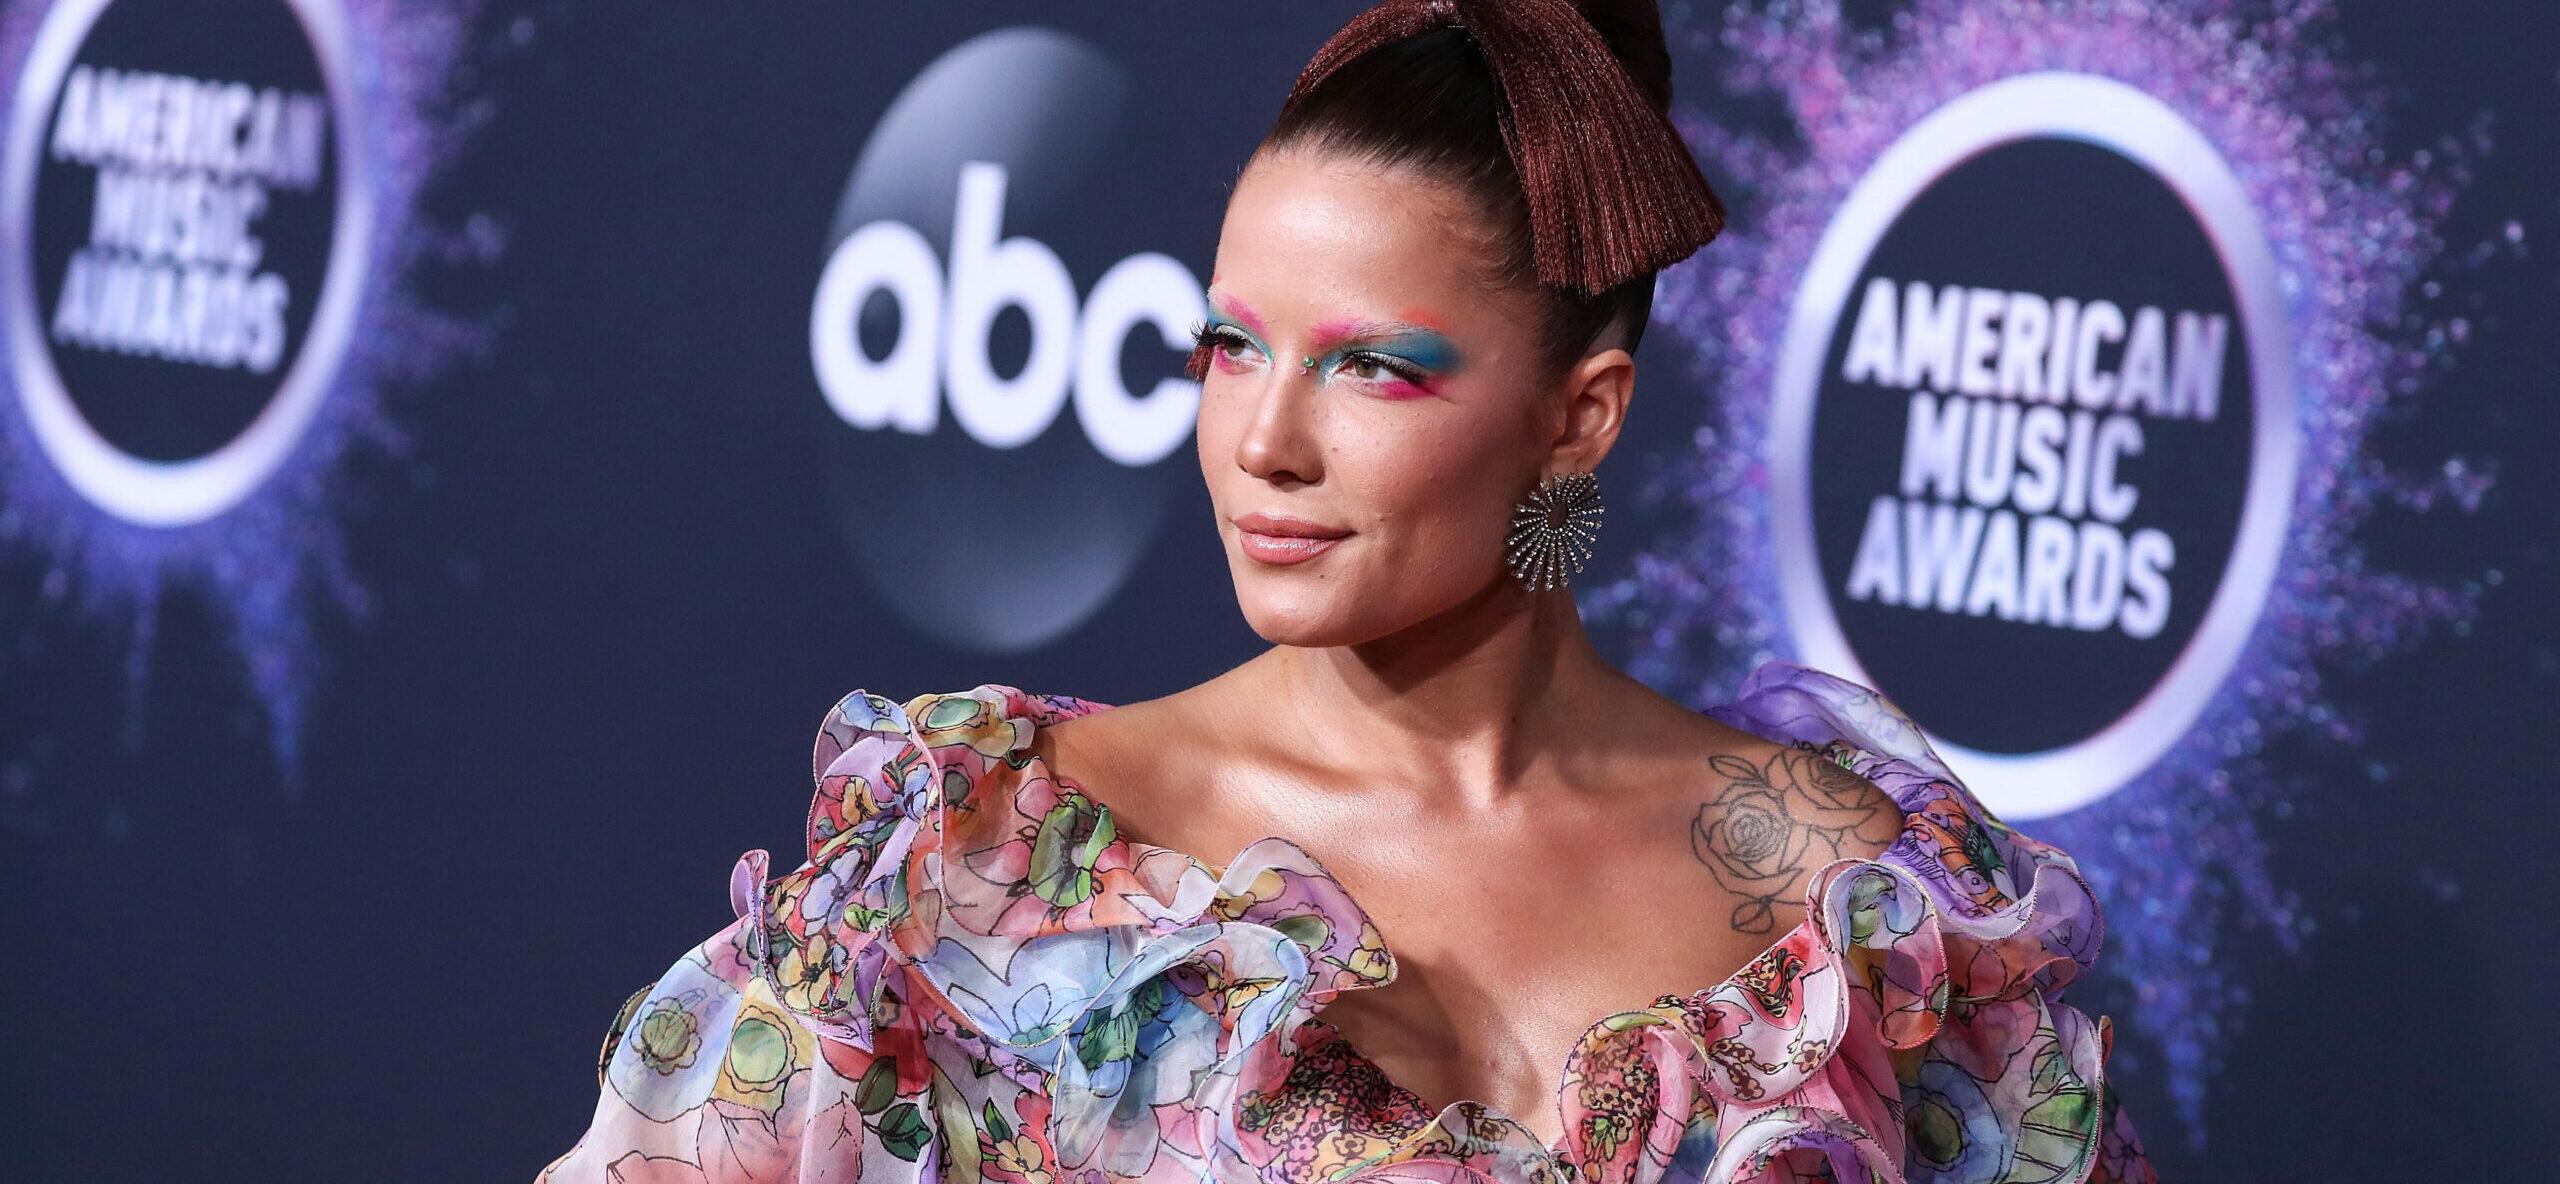 Halsey Reveals She Had 3 Miscarriages & Life-Saving Abortion Amid Roe v. Wade Being Overturned